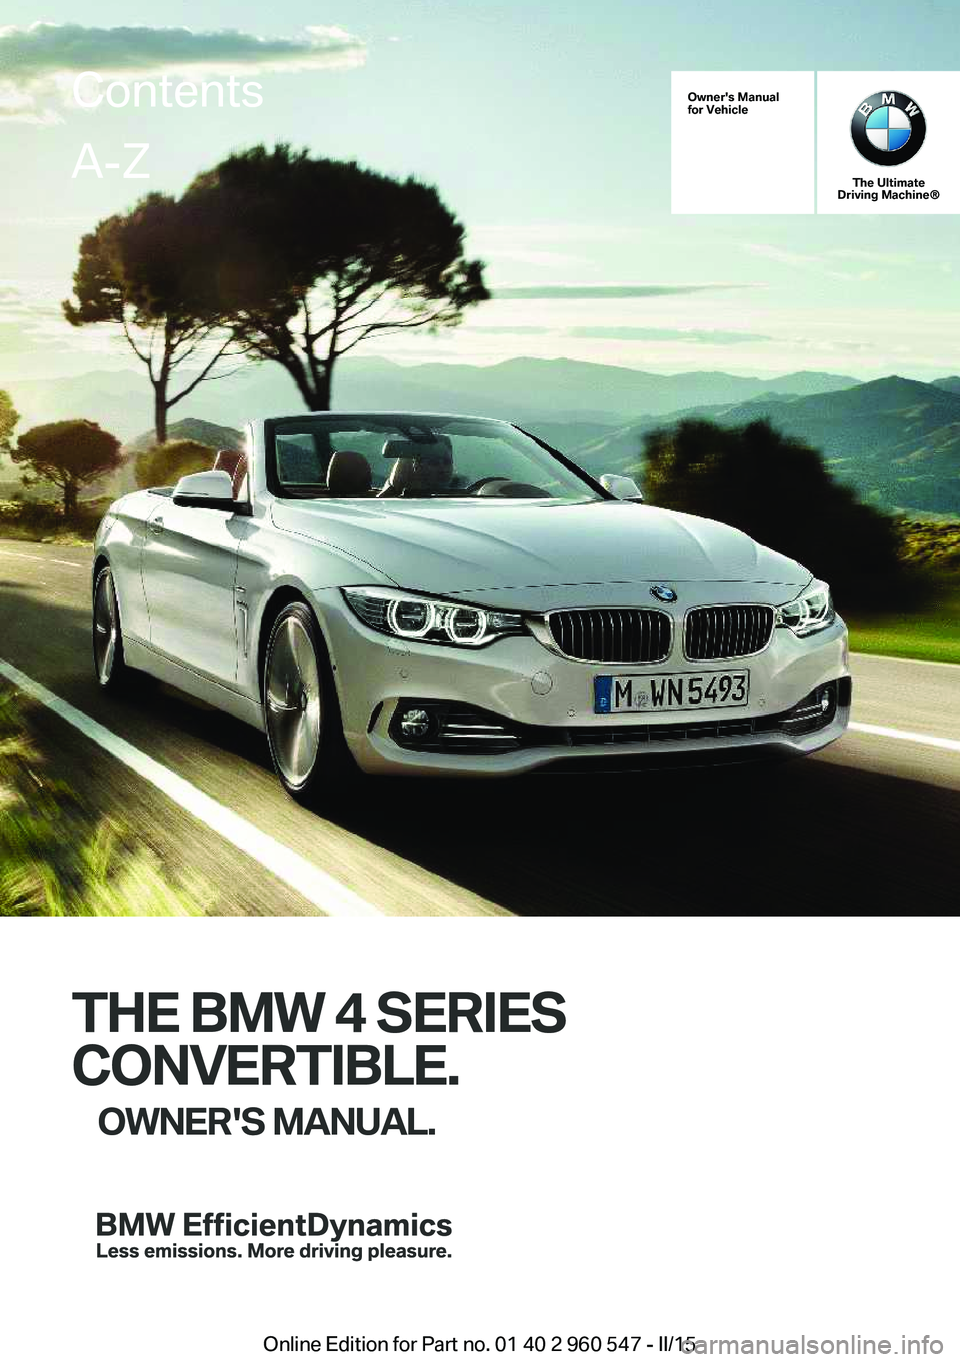 BMW 435I XDRIVE CONVERTIBLE 2015  Owners Manual Owner's Manual
for Vehicle
The Ultimate
Driving Machine®
THE BMW 4 SERIES
CONVERTIBLE. OWNER'S MANUAL.
ContentsA-Z
Online Edition for Part no. 01 40 2 960 547 - II/15   